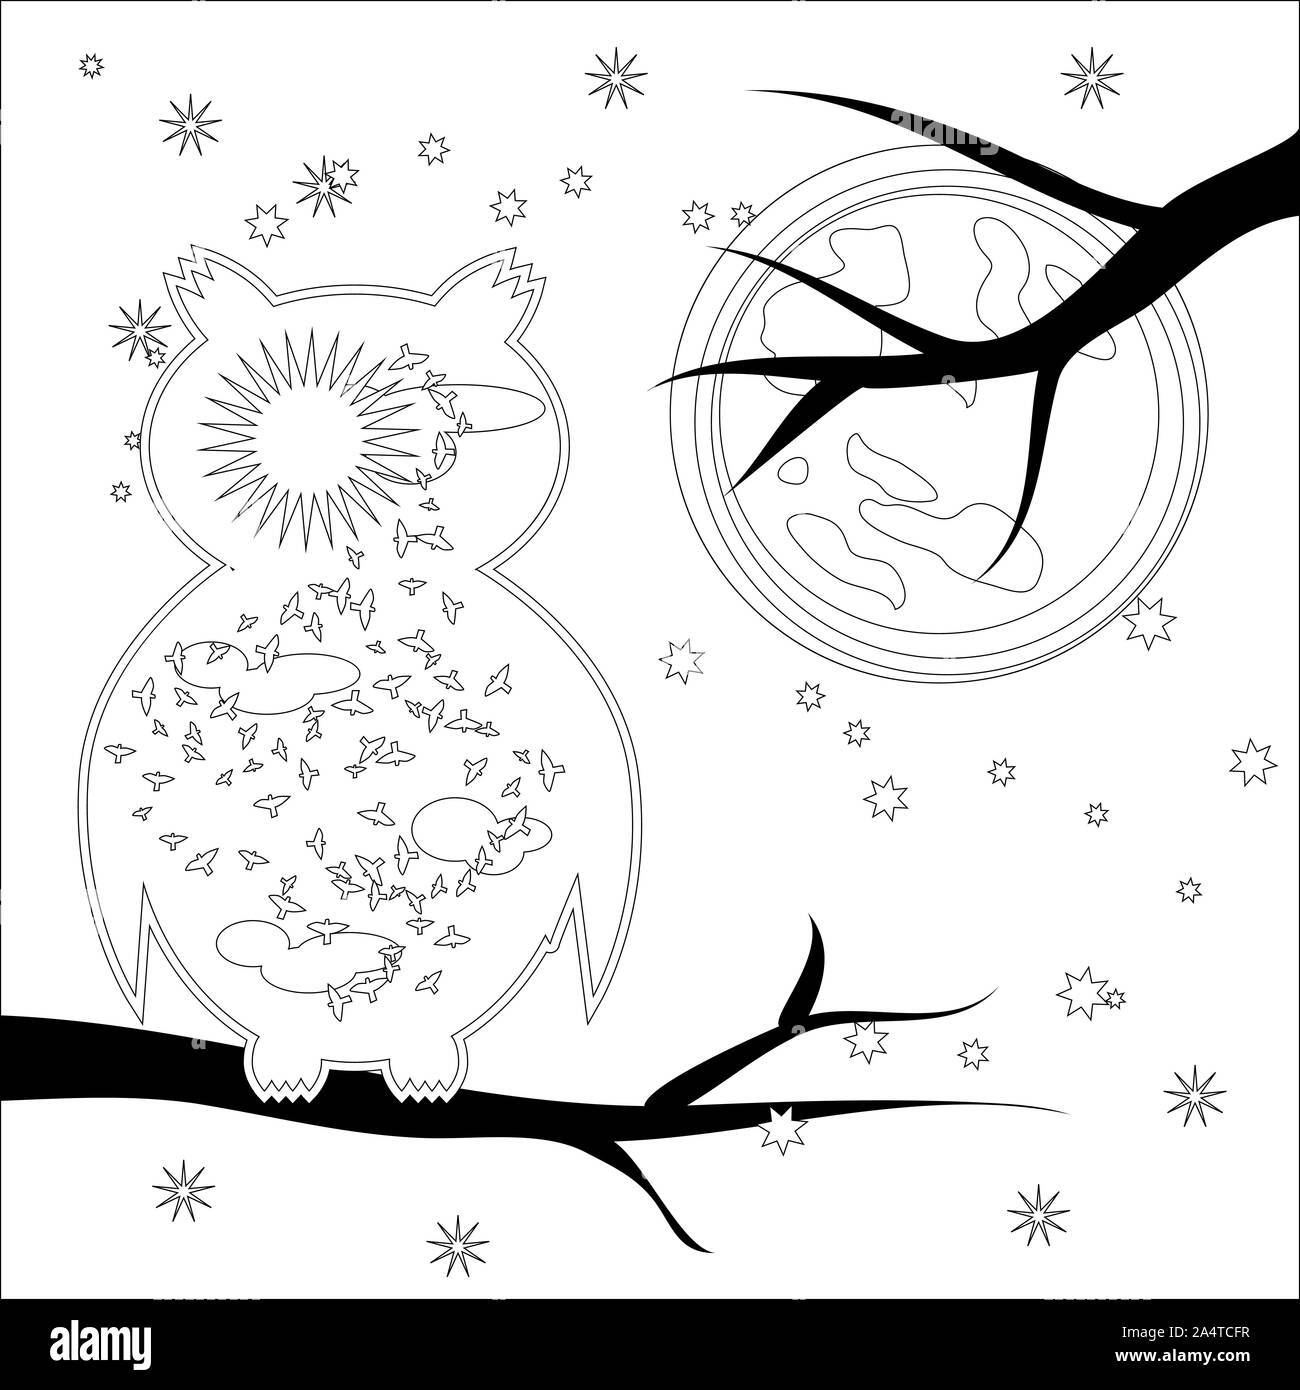 Coloring page with symbol moon, sun, owl. coloring book for adult,  antistress, album, wall mural, art, tattoo. Black and white outline  illustration Stock Photo - Alamy